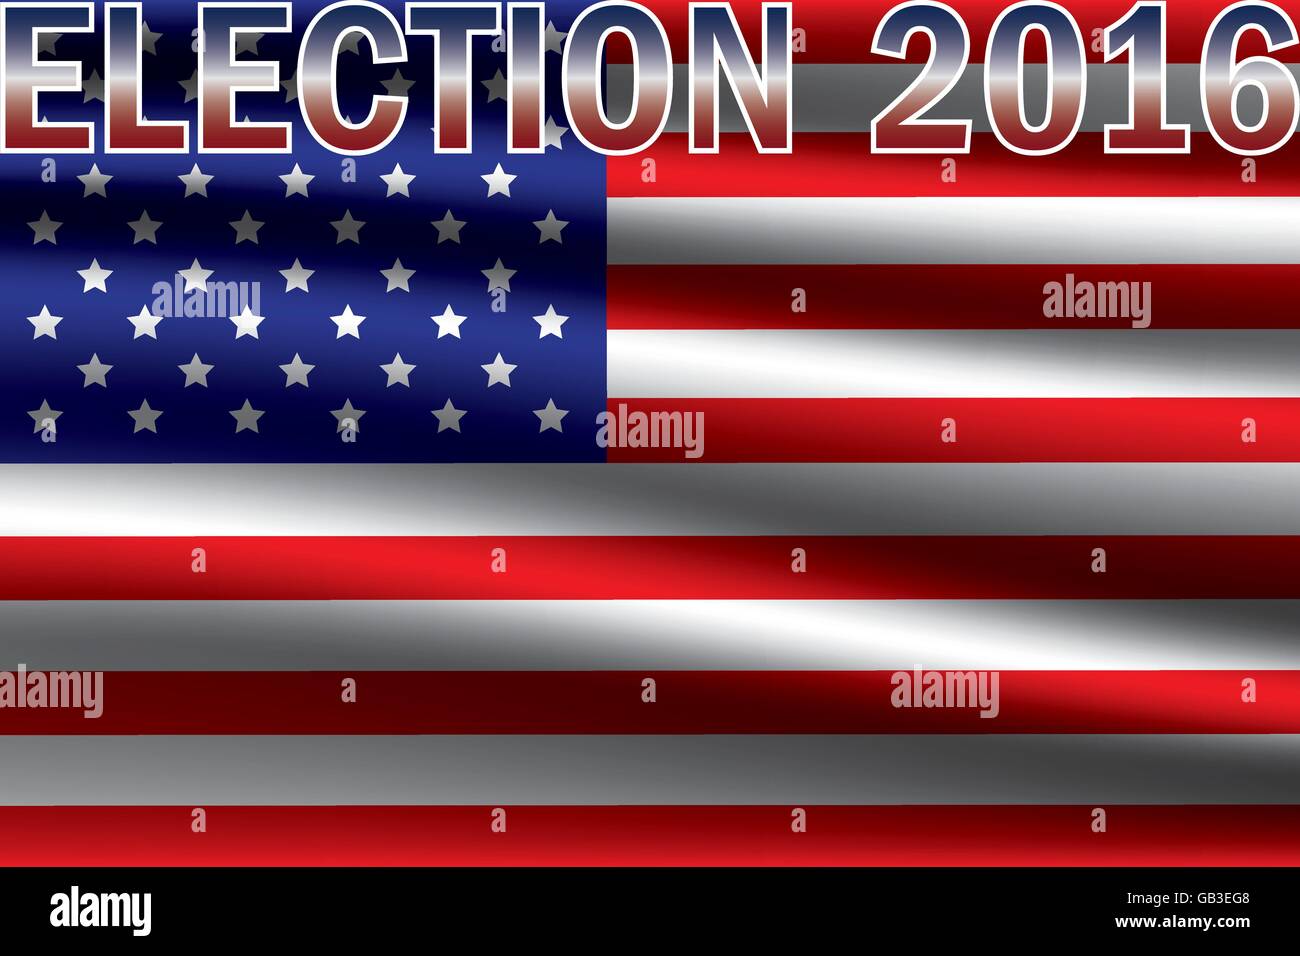 USA presidential election 2016 on USA flag background. Vote for US president 2016 graphic design background. Stock Vector